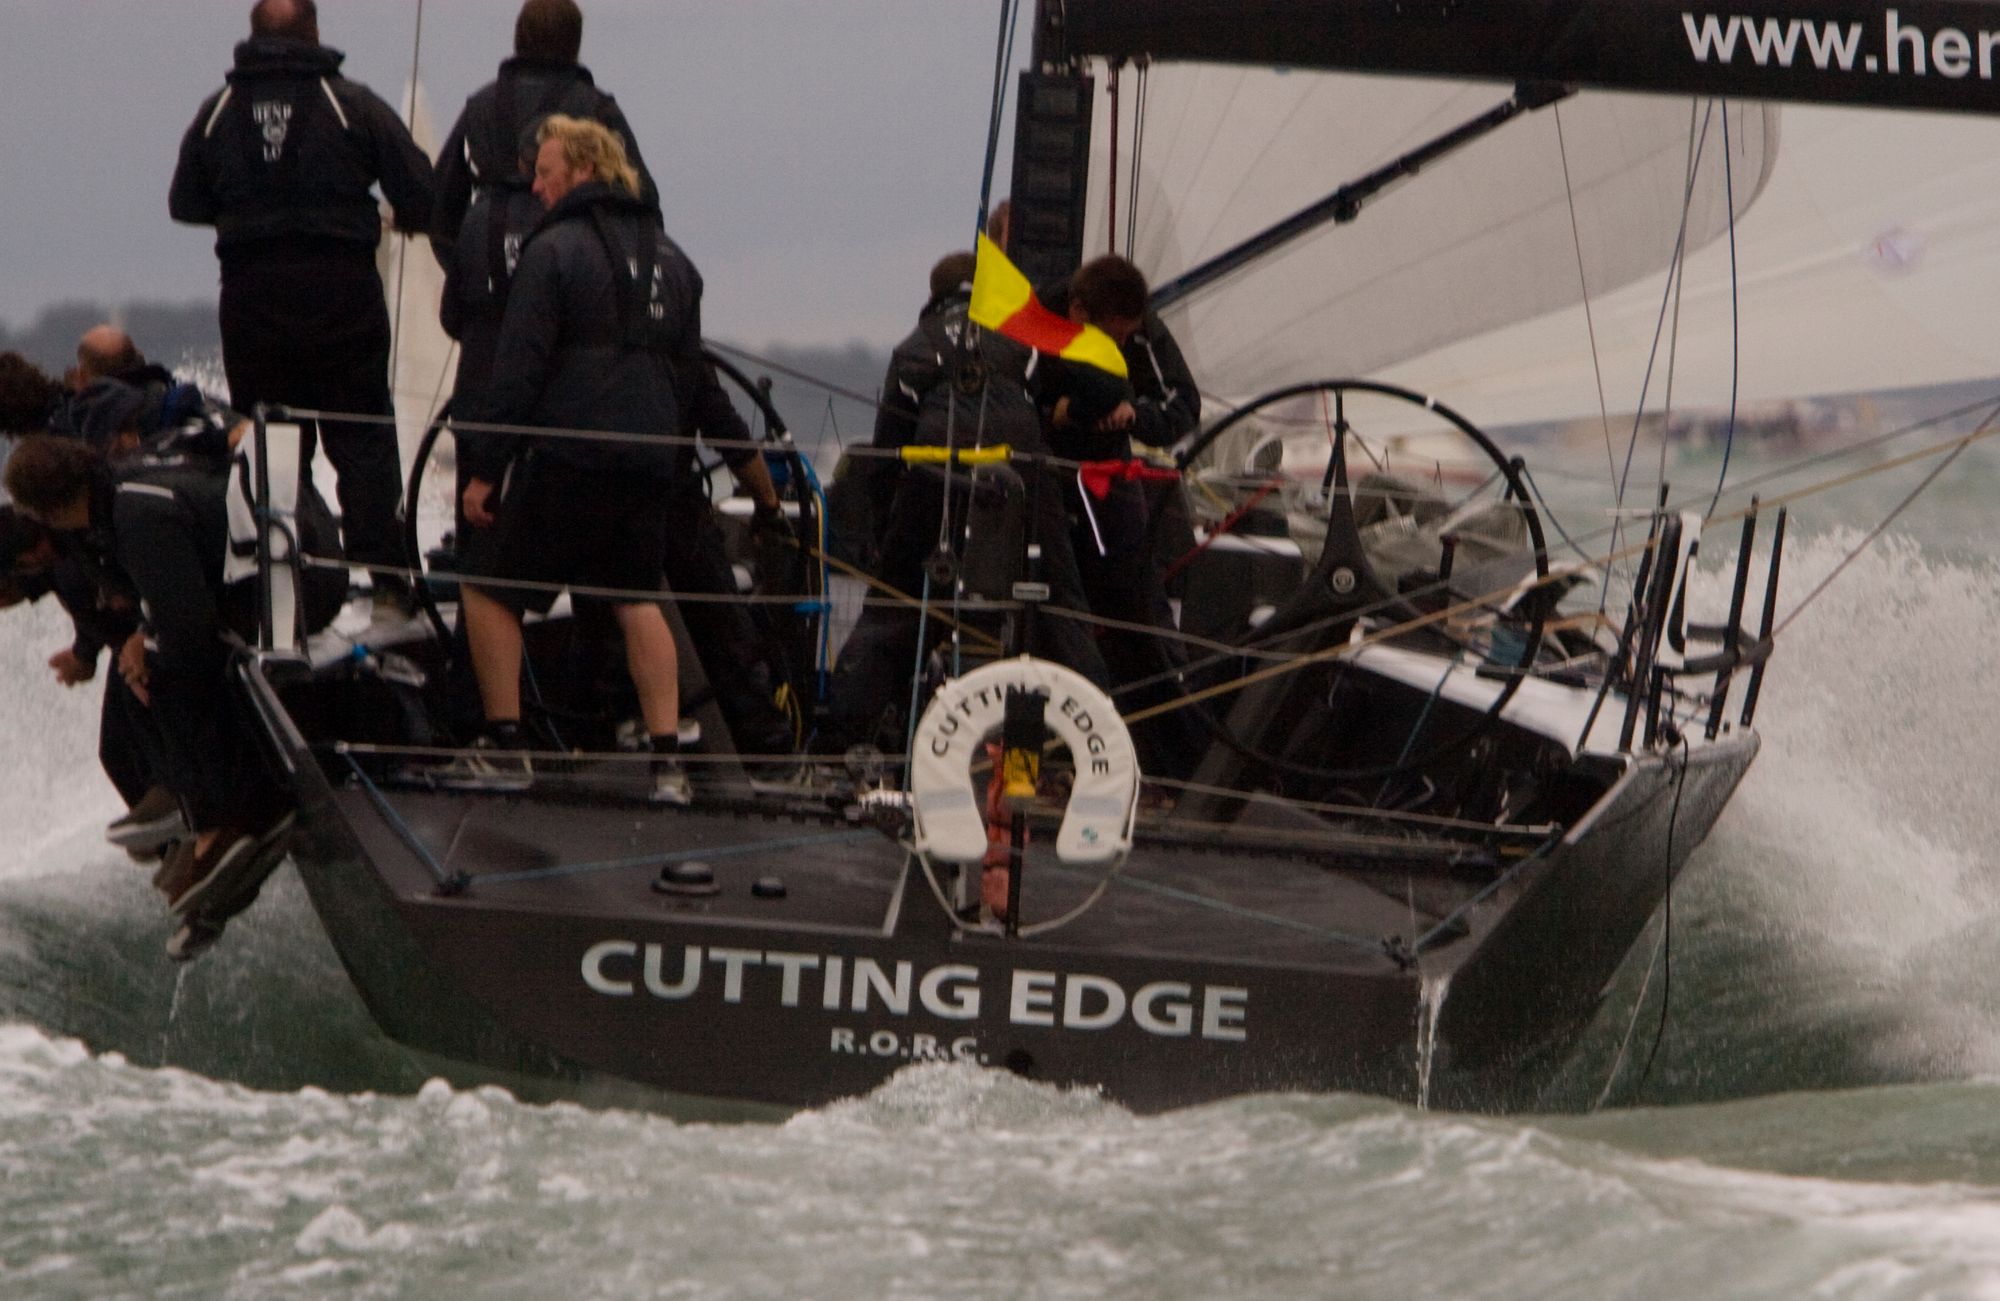 A sailboat designed for racing with over a dozen crew members sails through waves.